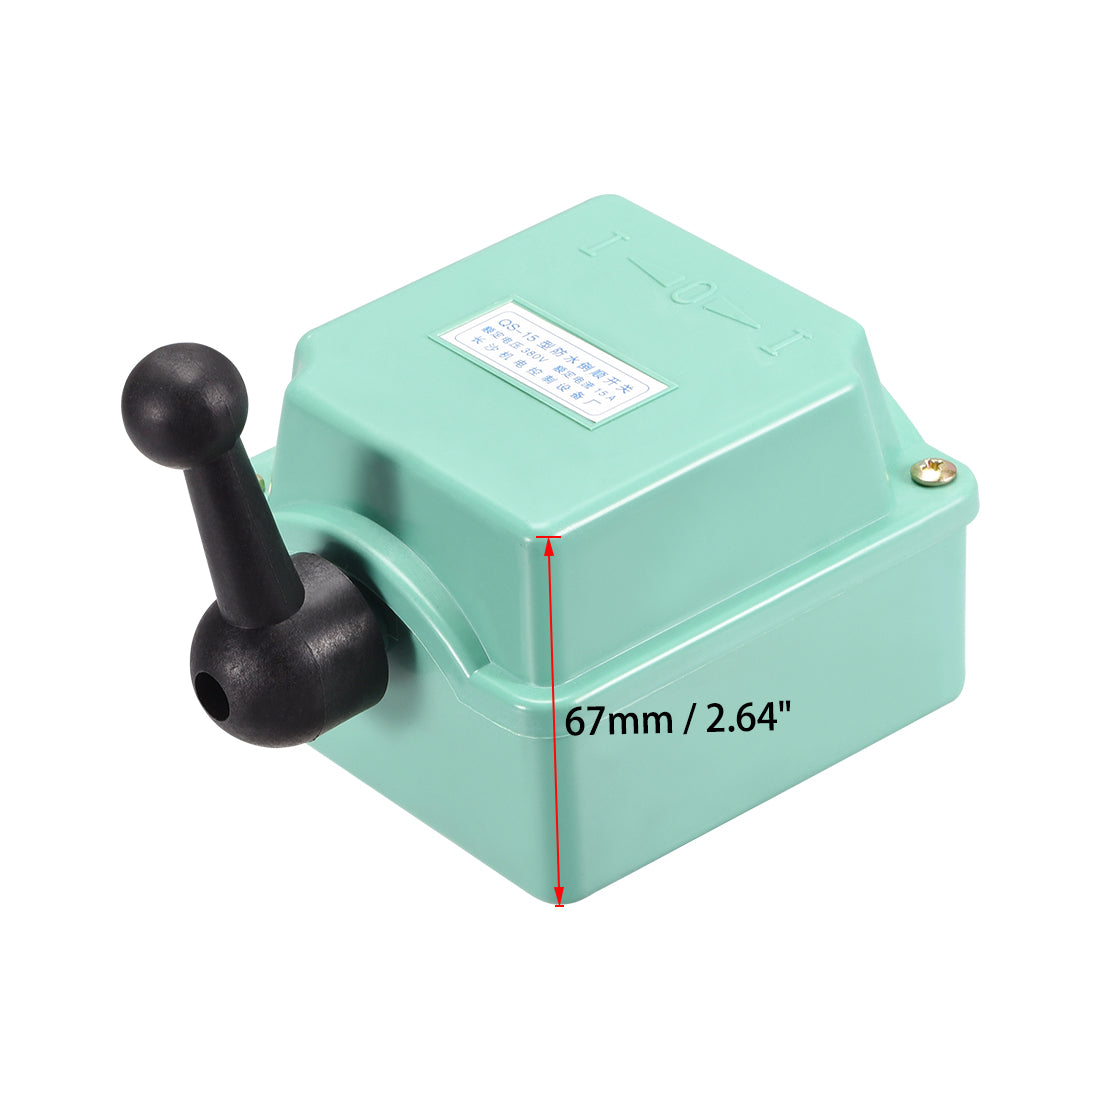 uxcell Uxcell Drum Switch QS-15 3 Positon Forward/Off/Reverse Motor Control Plastic Shell 15A